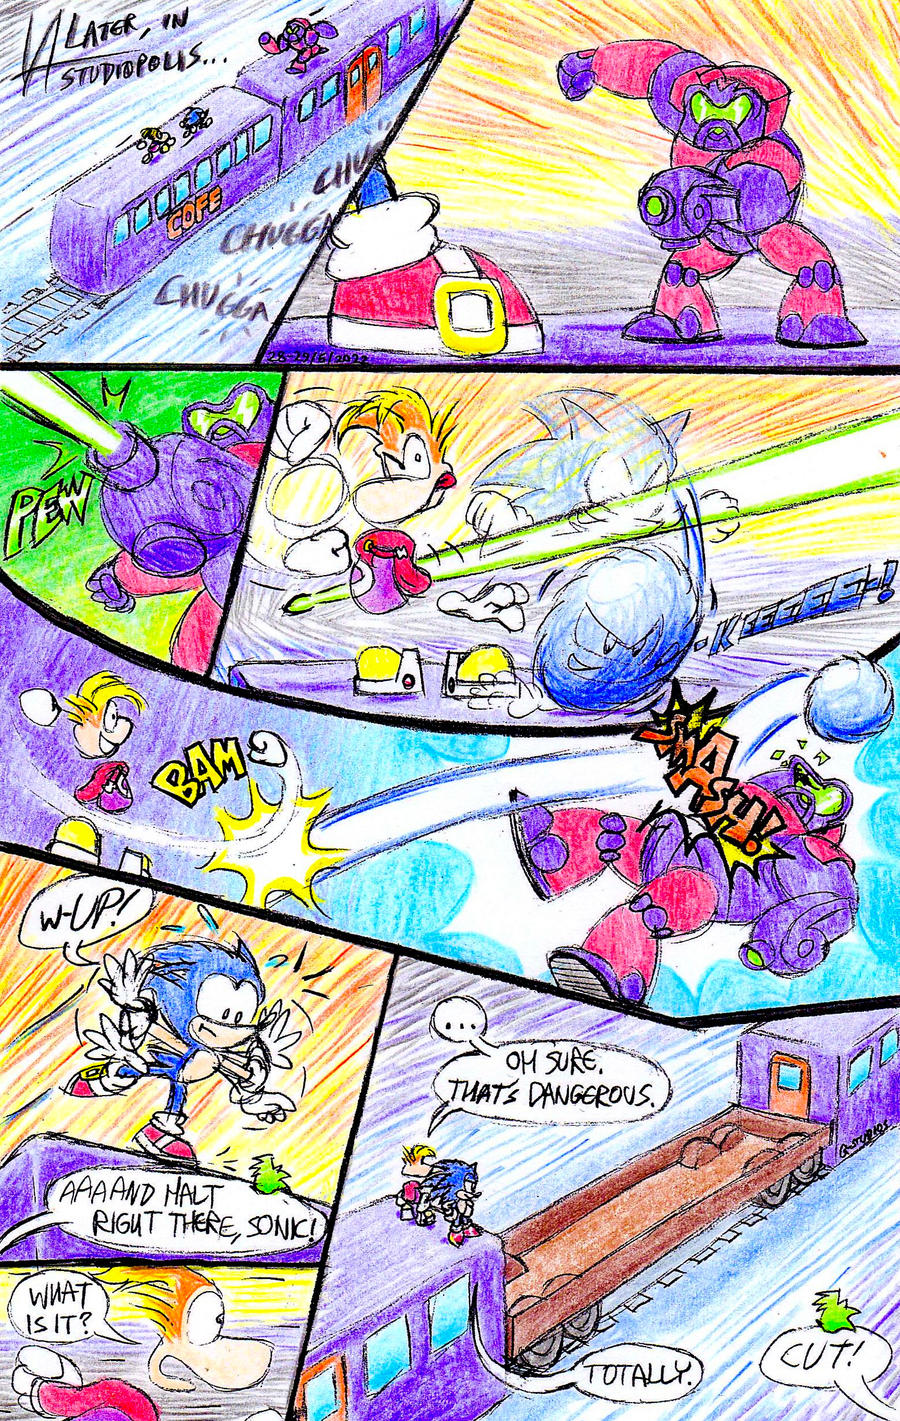 Sonic Battle 2:The Trailer(See this before the ep) - Comic Studio